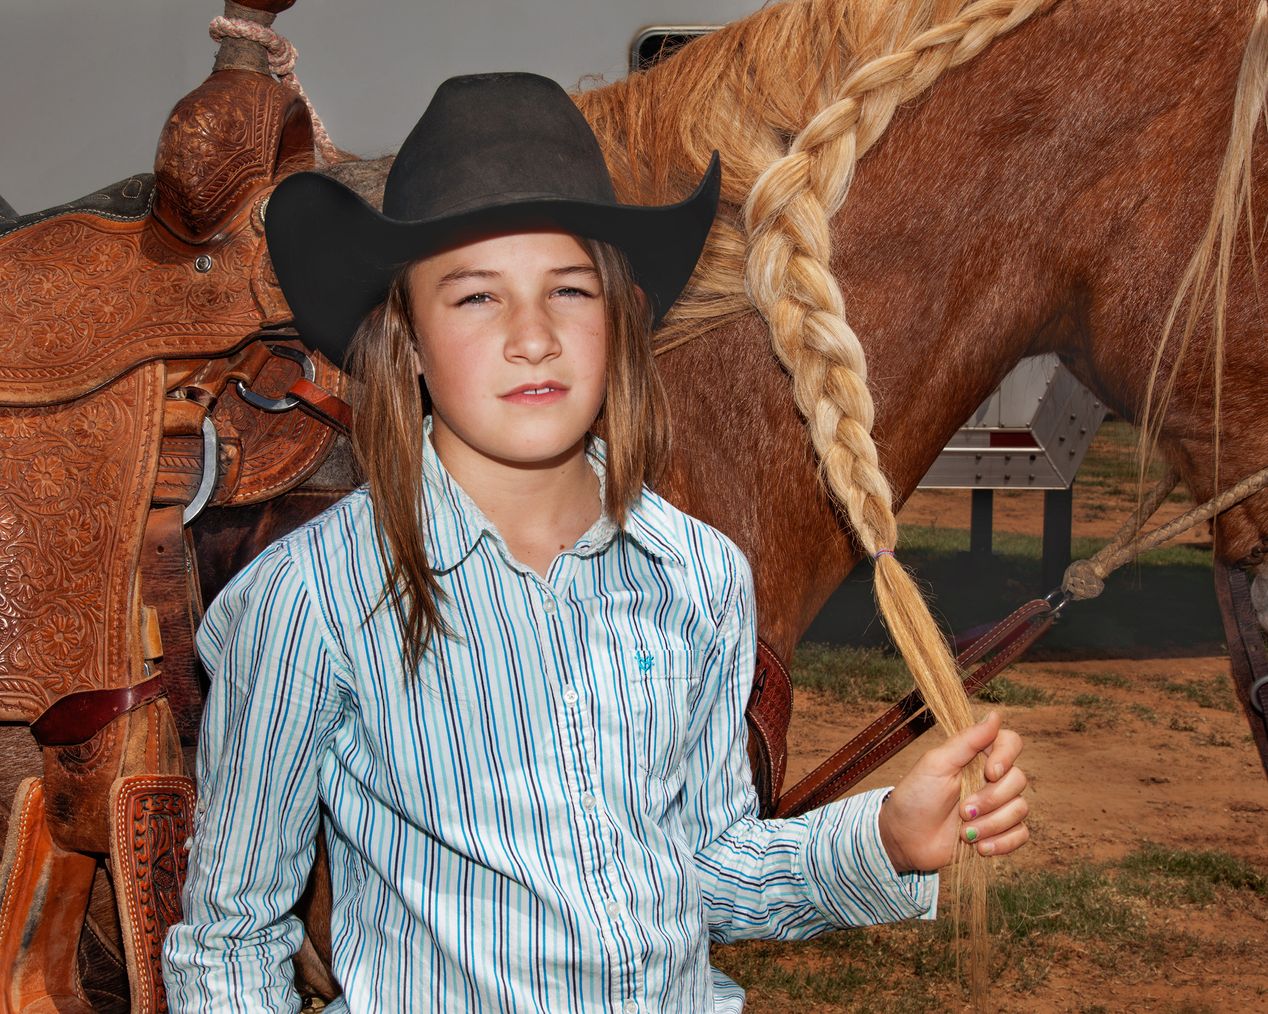 Young rodeo girl holding her braided horse's mane, environmental portrait photography, Ilona Szwarc, contemporary Los Angeles artist.